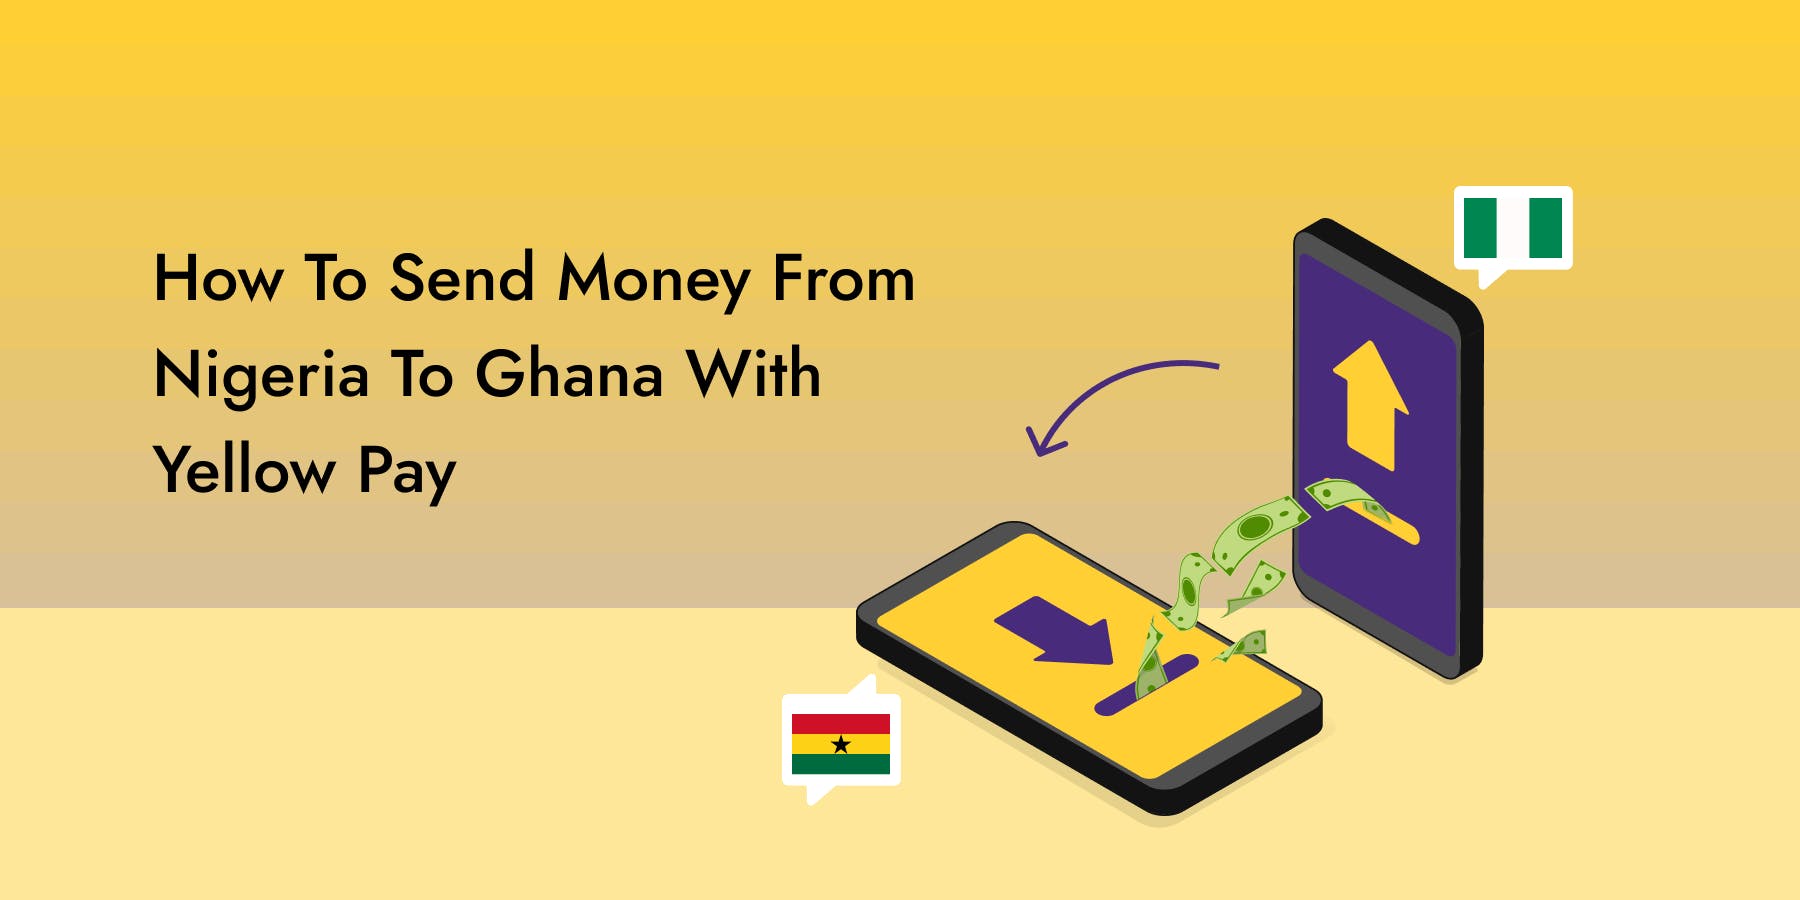 How to Send Money from Nigeria to Ghana